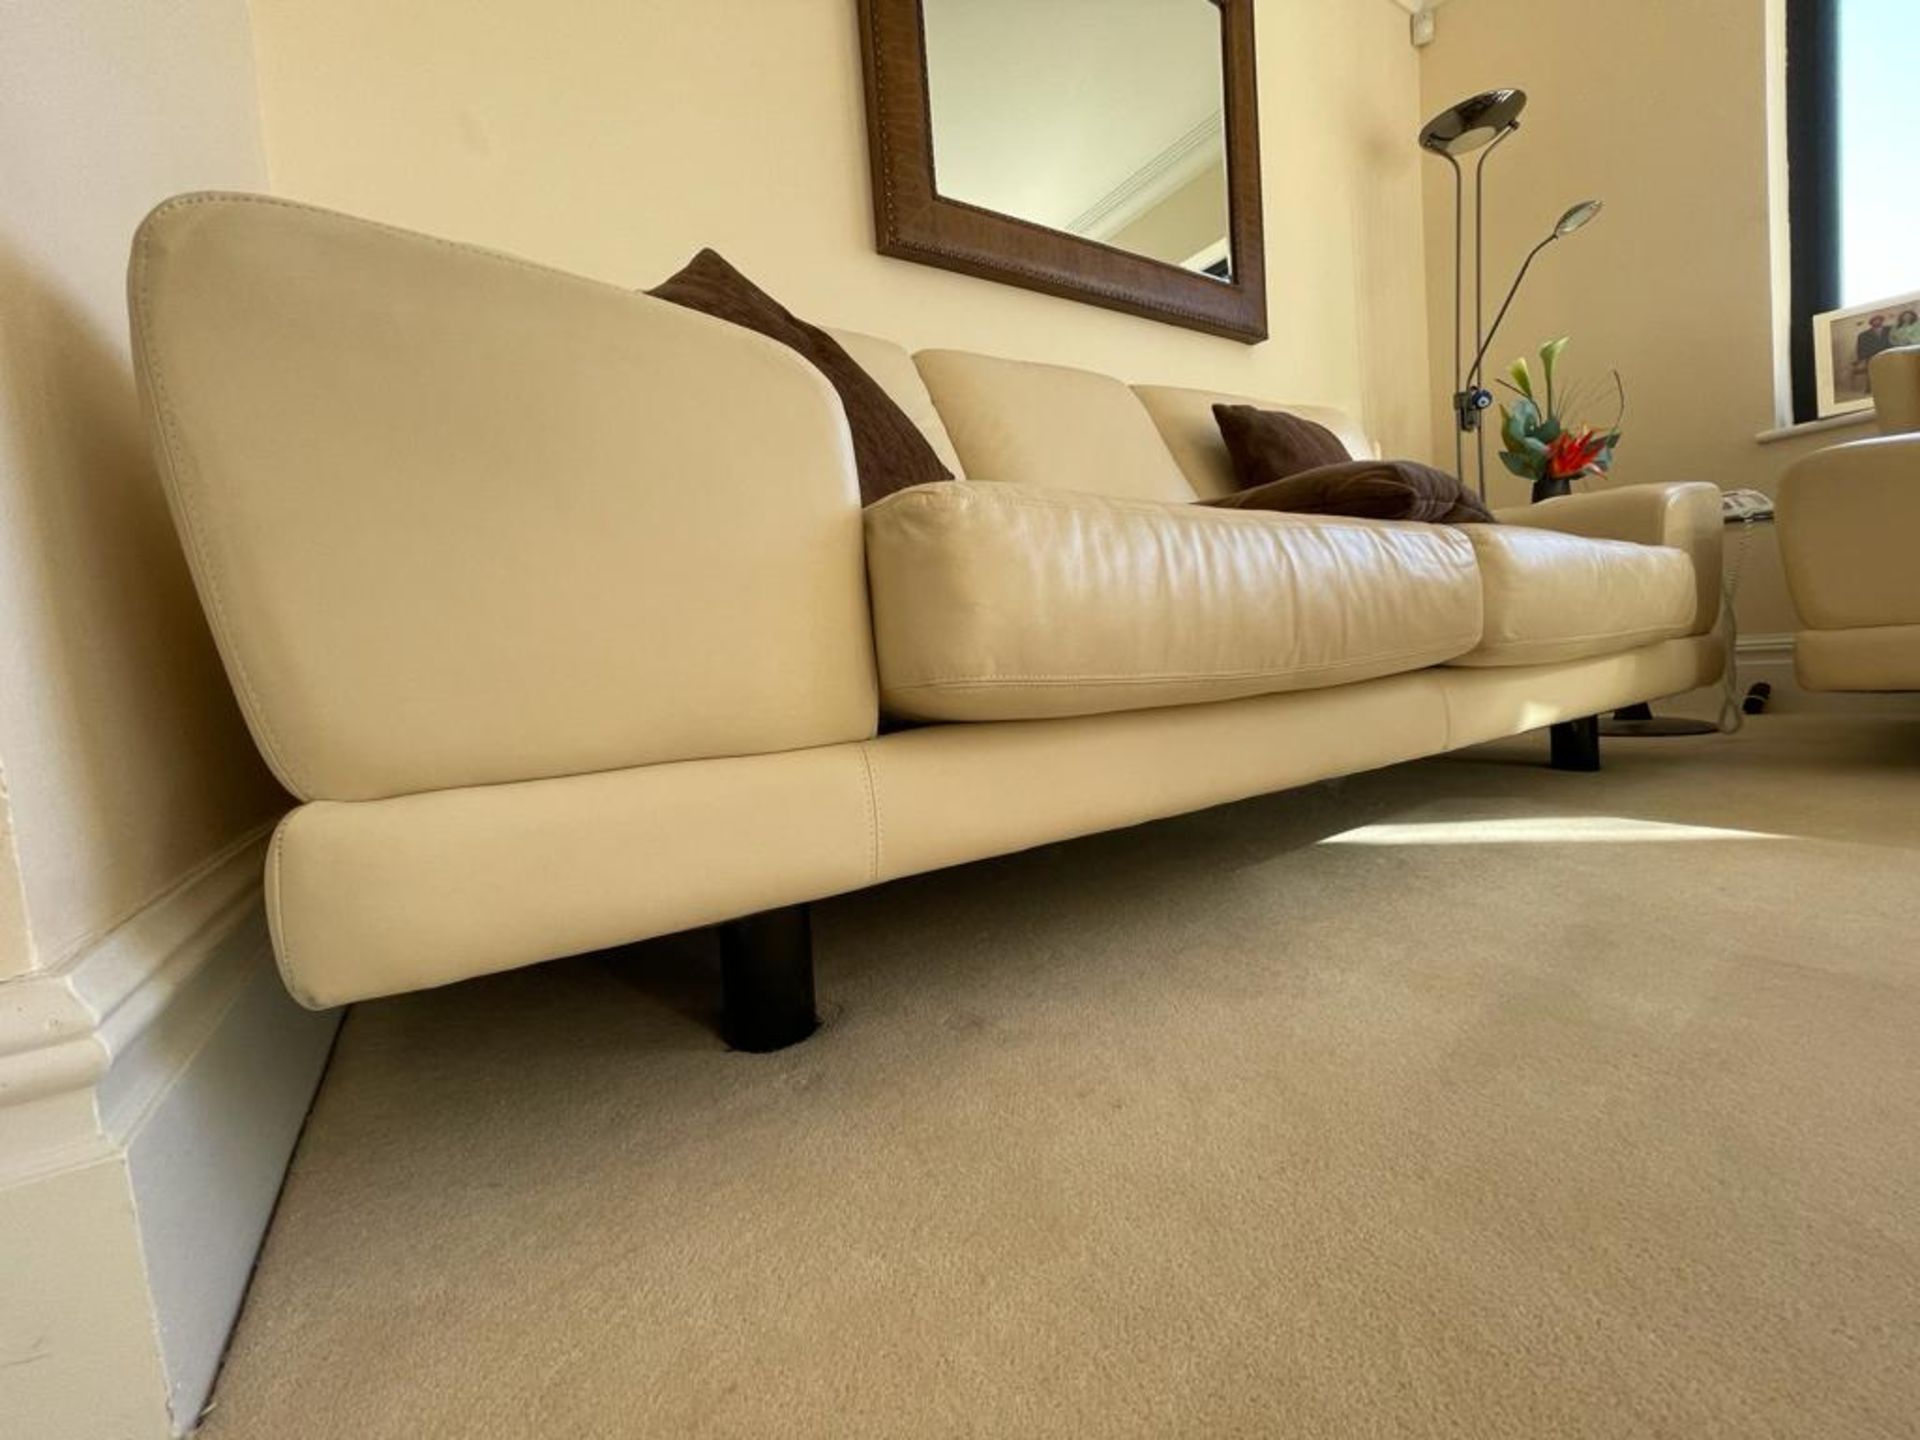 2 x Genuine Cream Leather Contemporary Sofas With Large Armpads and Curved Backs - NO VAT ON THE - Image 16 of 23